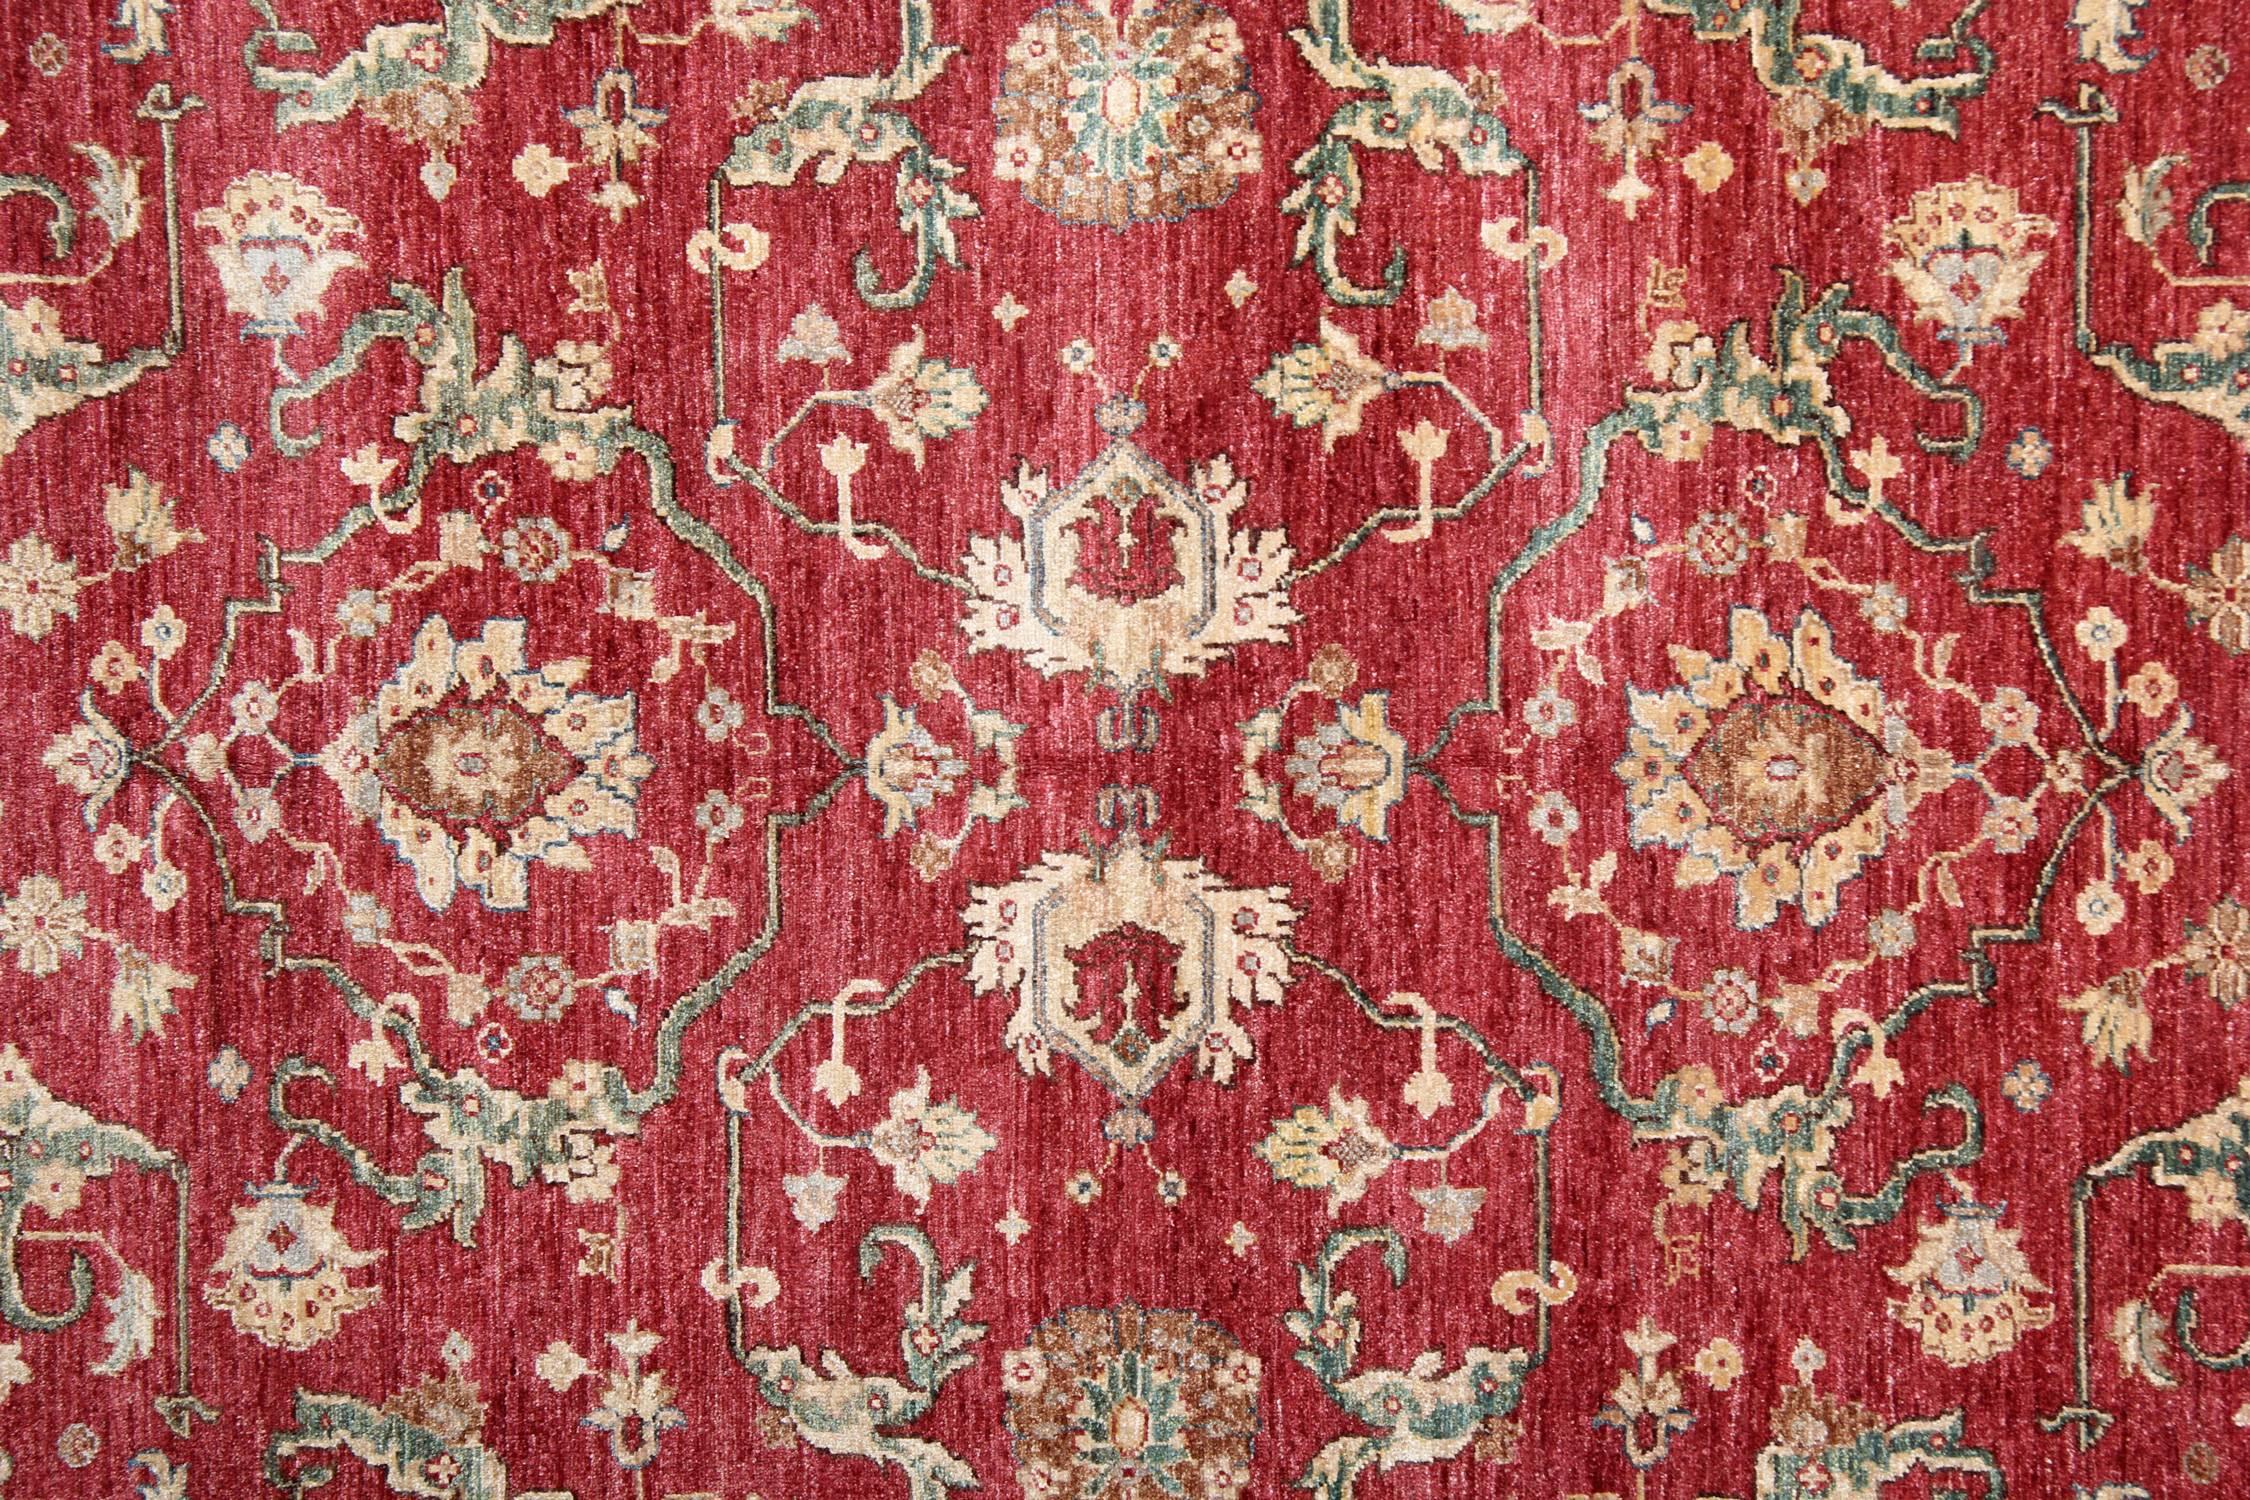 This magnificent mature red rug is a Ziegler Sultanabad woven rug made on our looms by our master weavers in Afghanistan. The carpet rug is handmade with all natural veg dyes and all handspun wool. The large-scale floral rug design makes Sultanabad